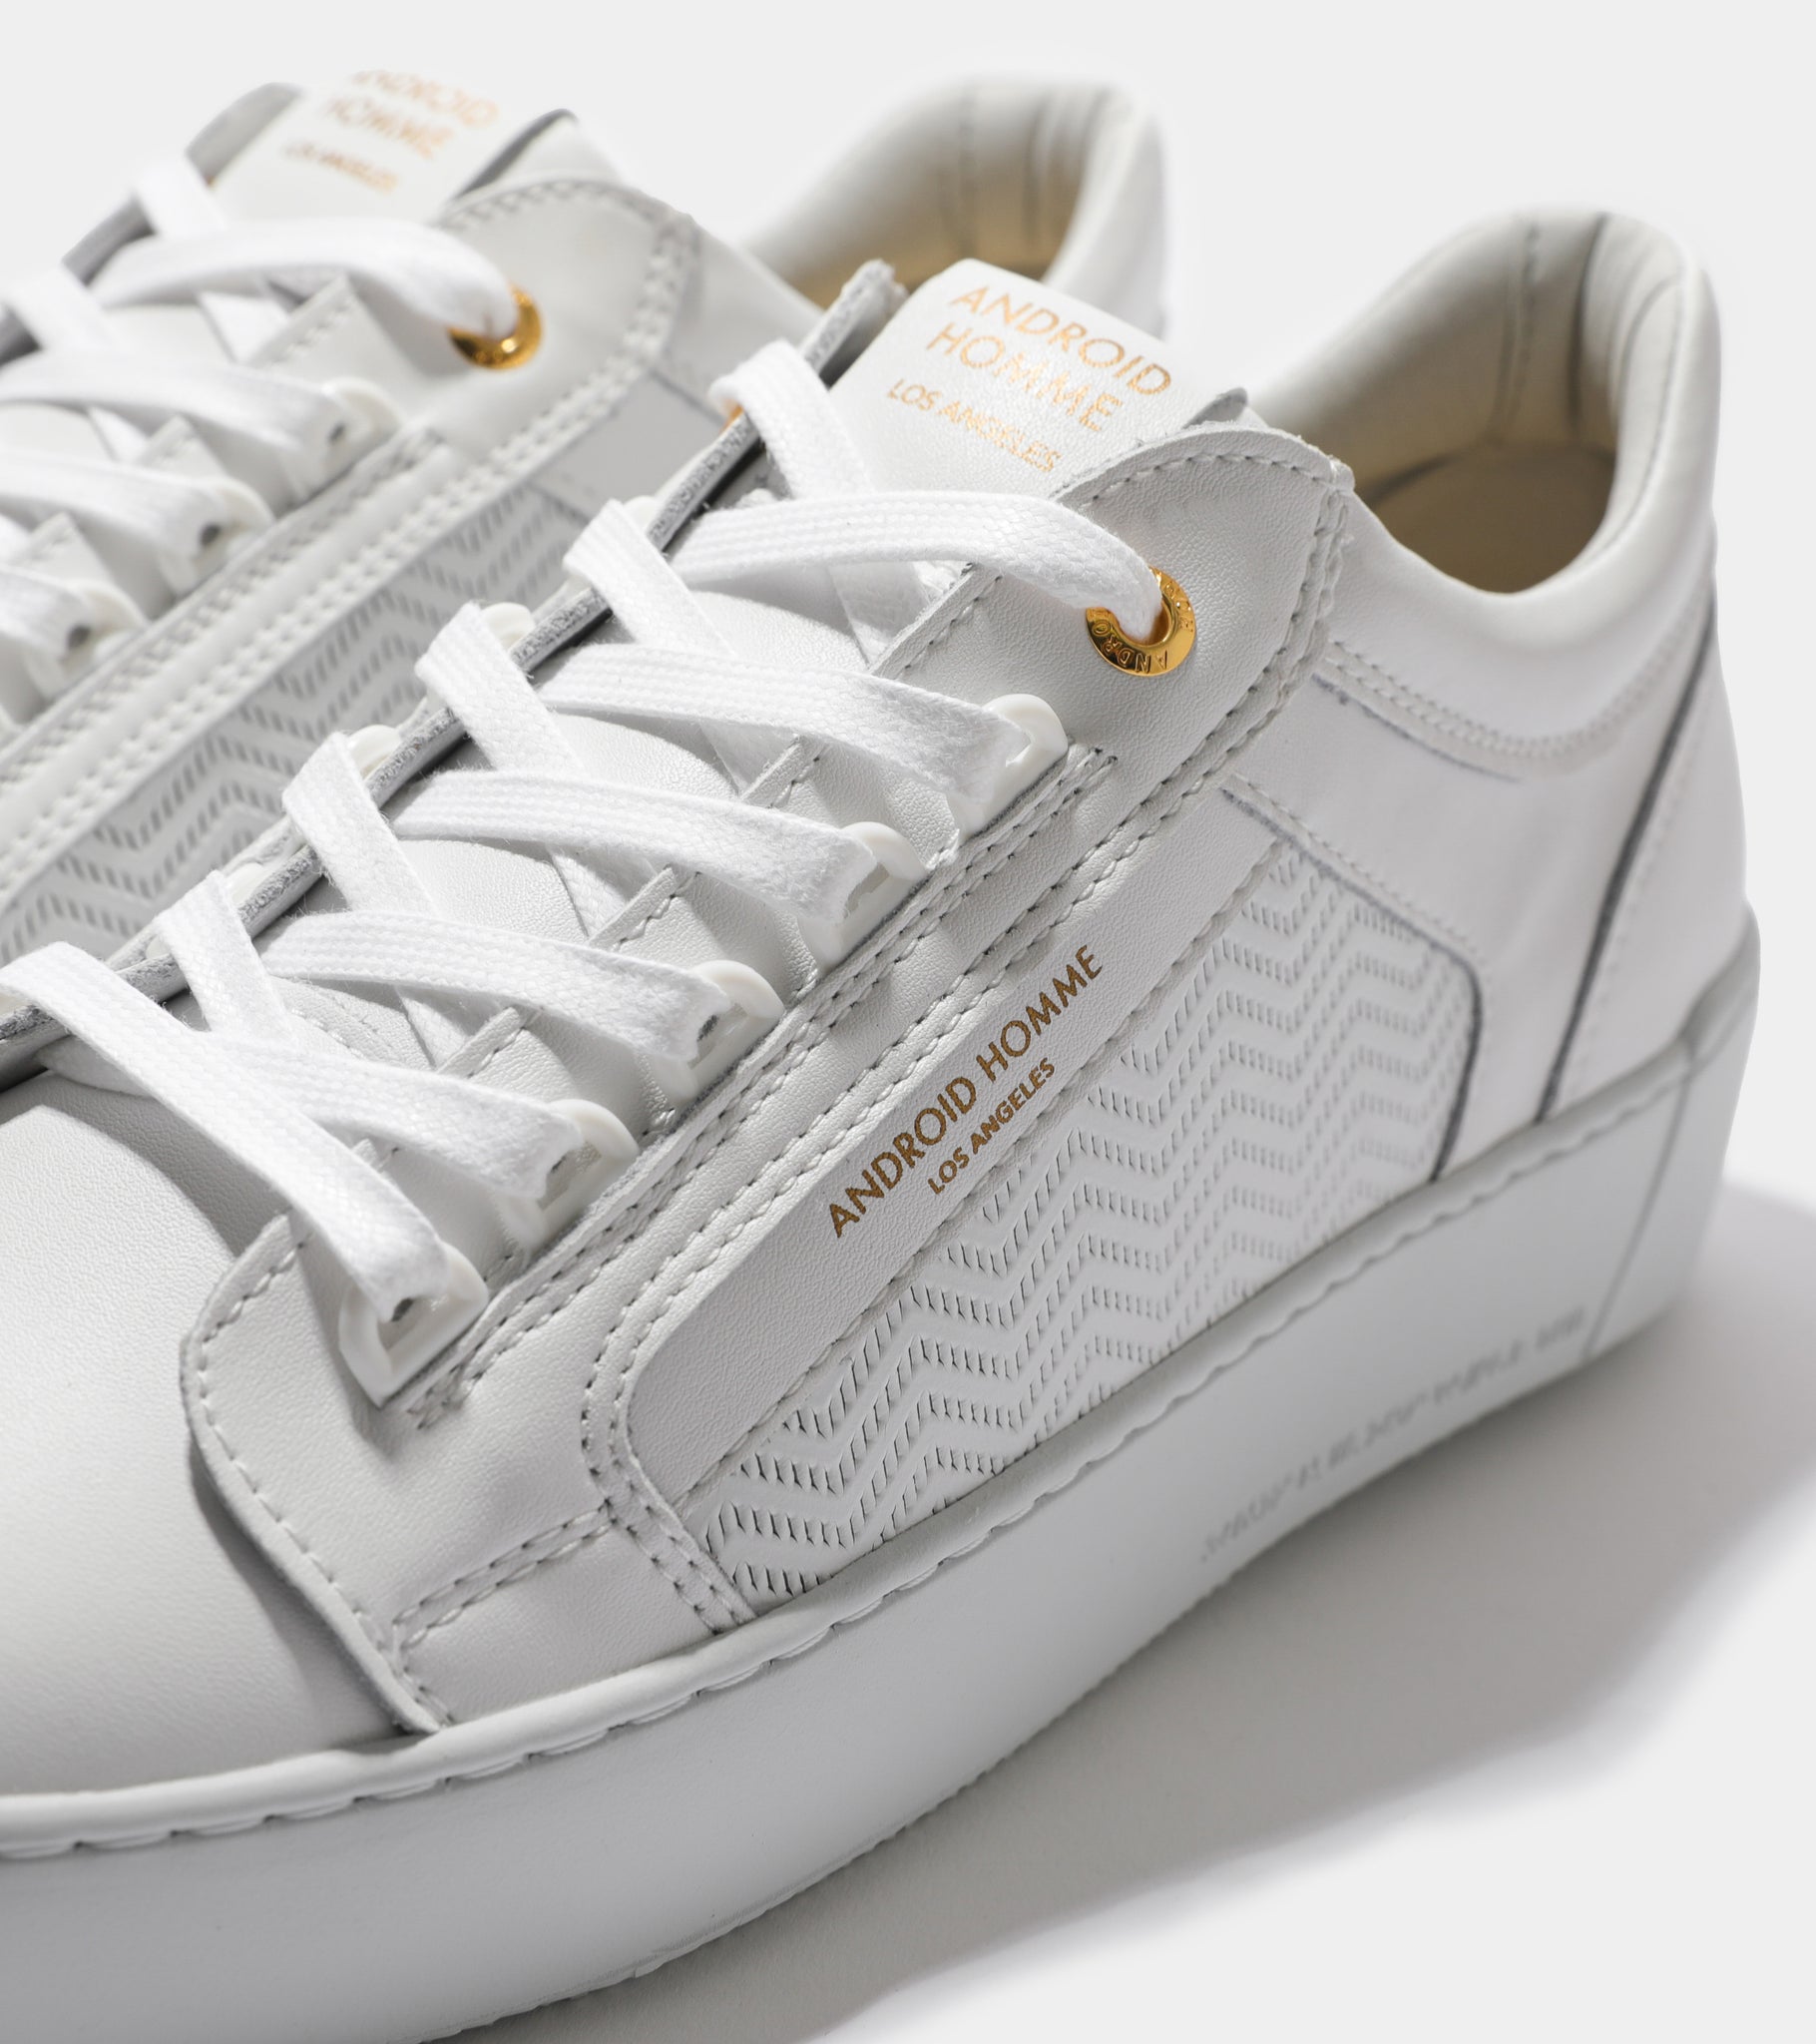 Detailed ecom imagery of the Venice White Emboss Leather Android Homme Trainers.